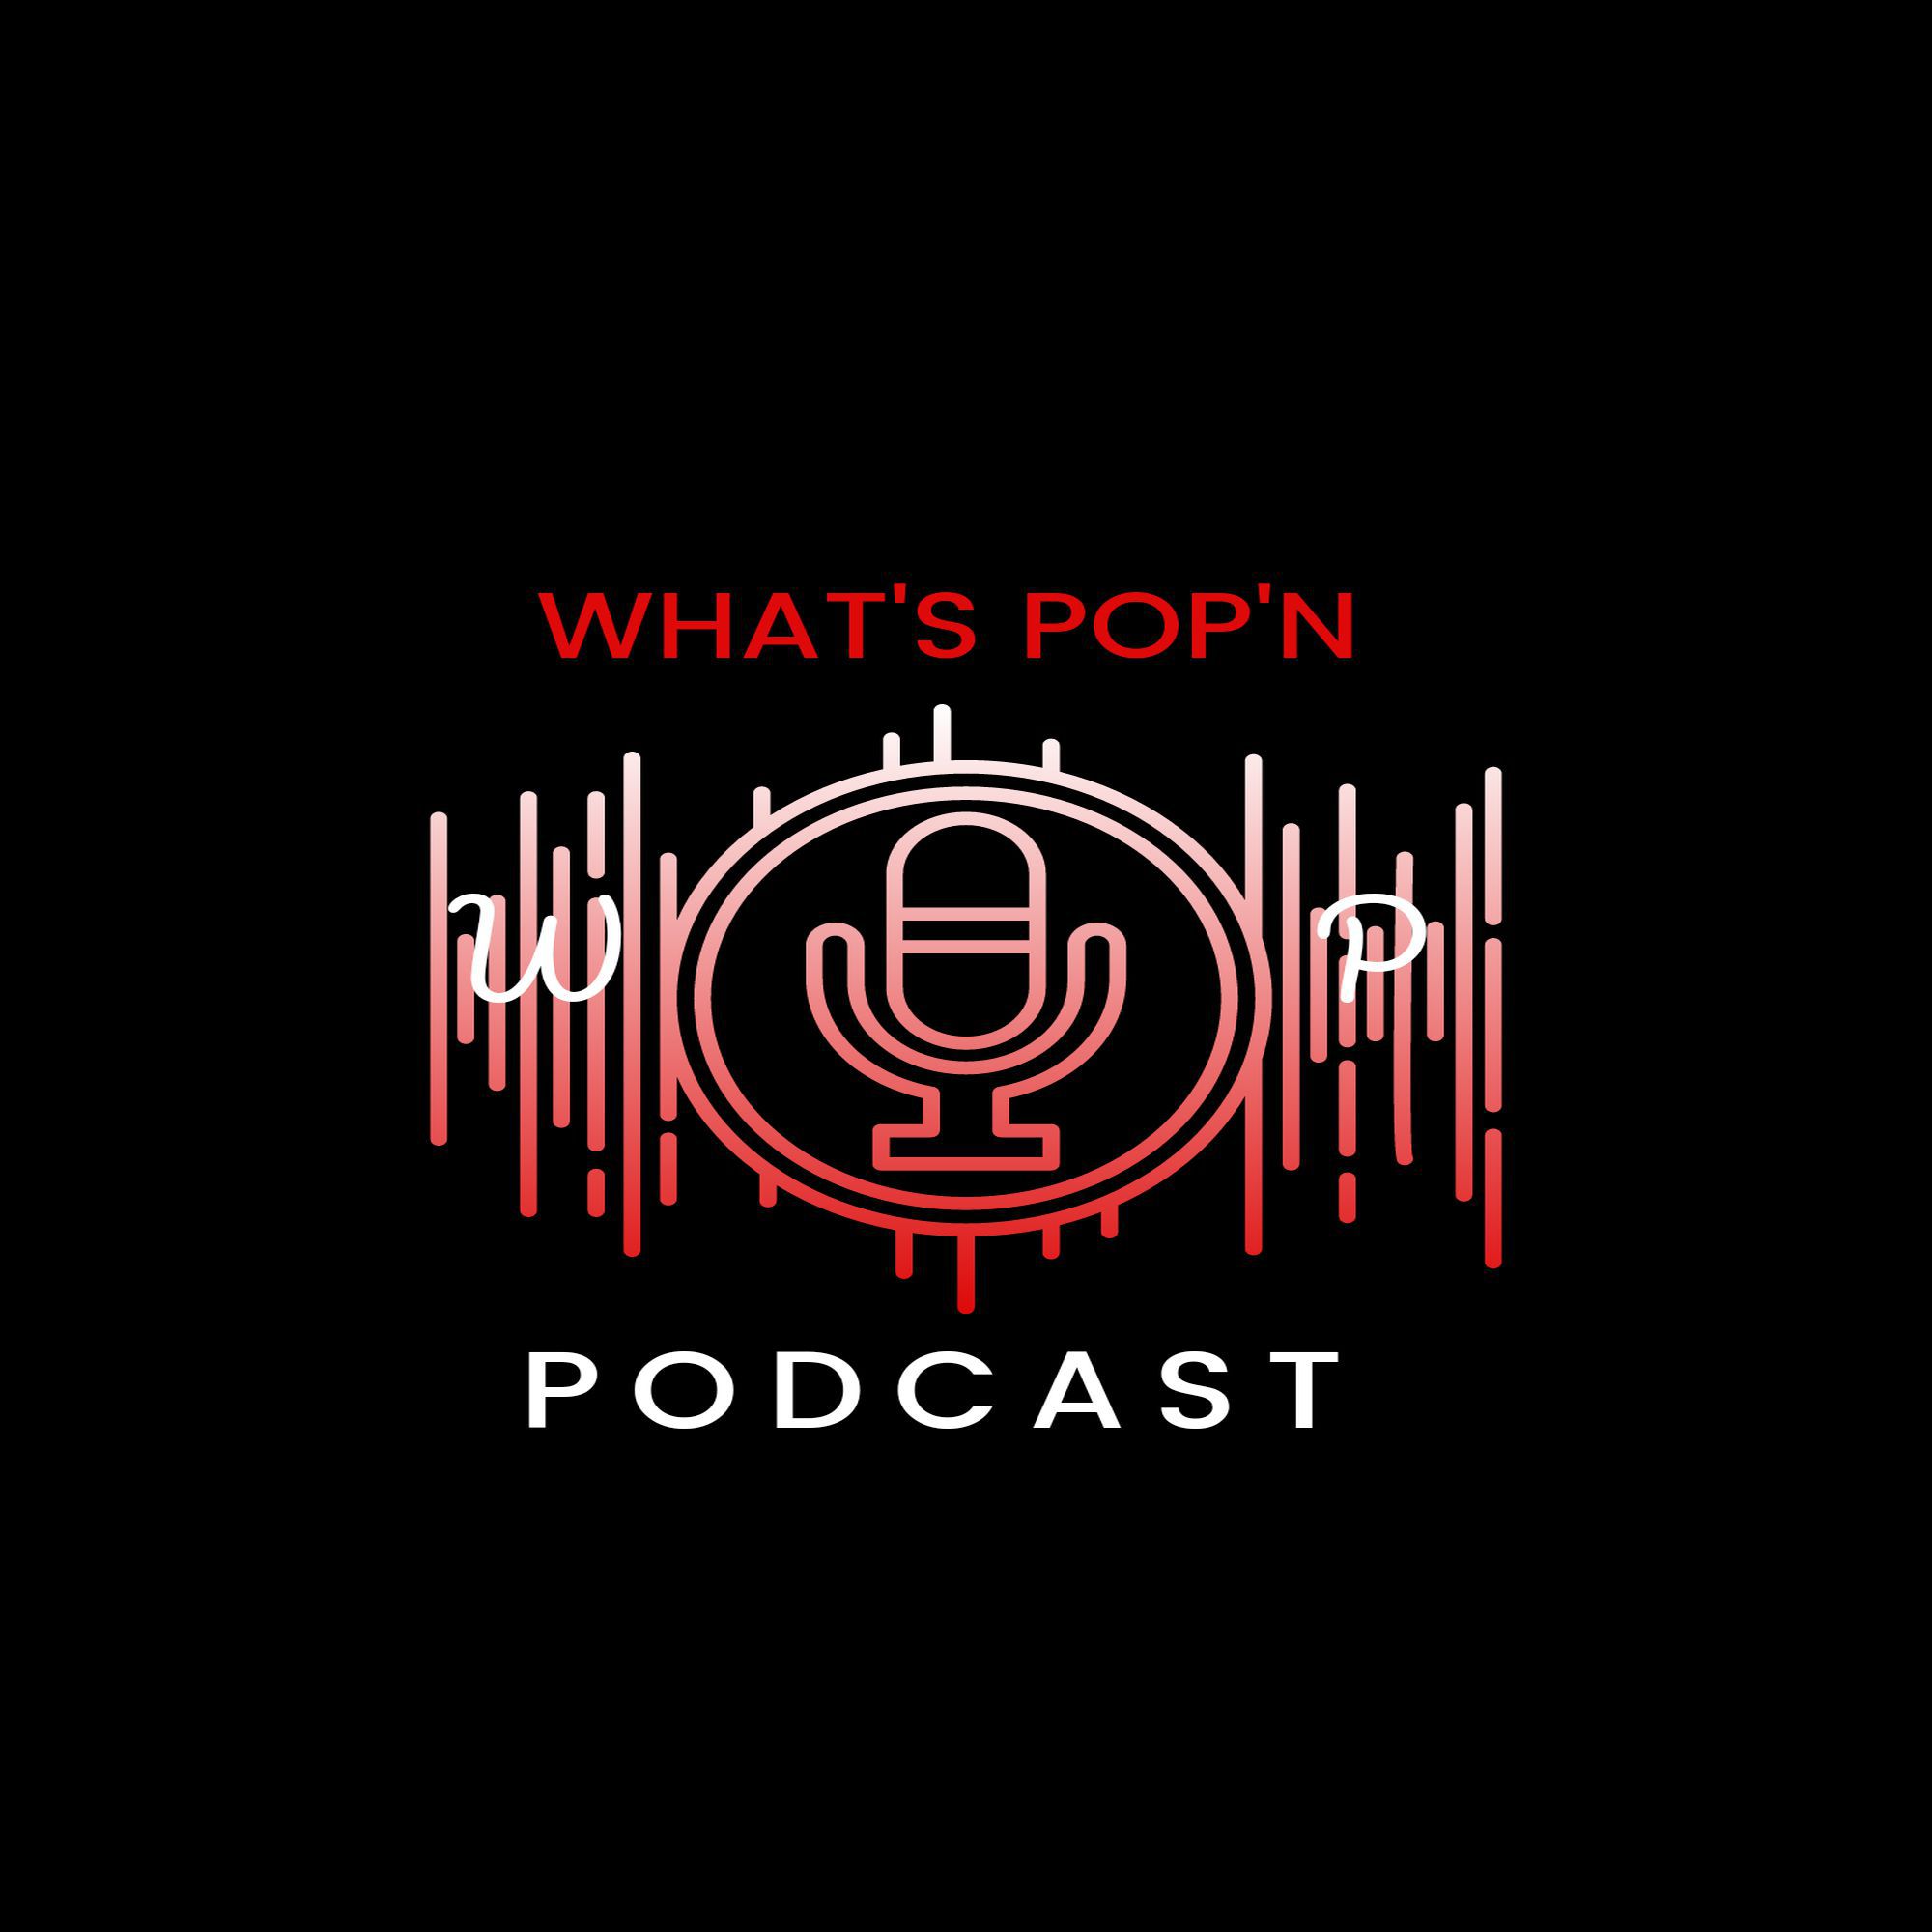 What's Pop'n Podcast